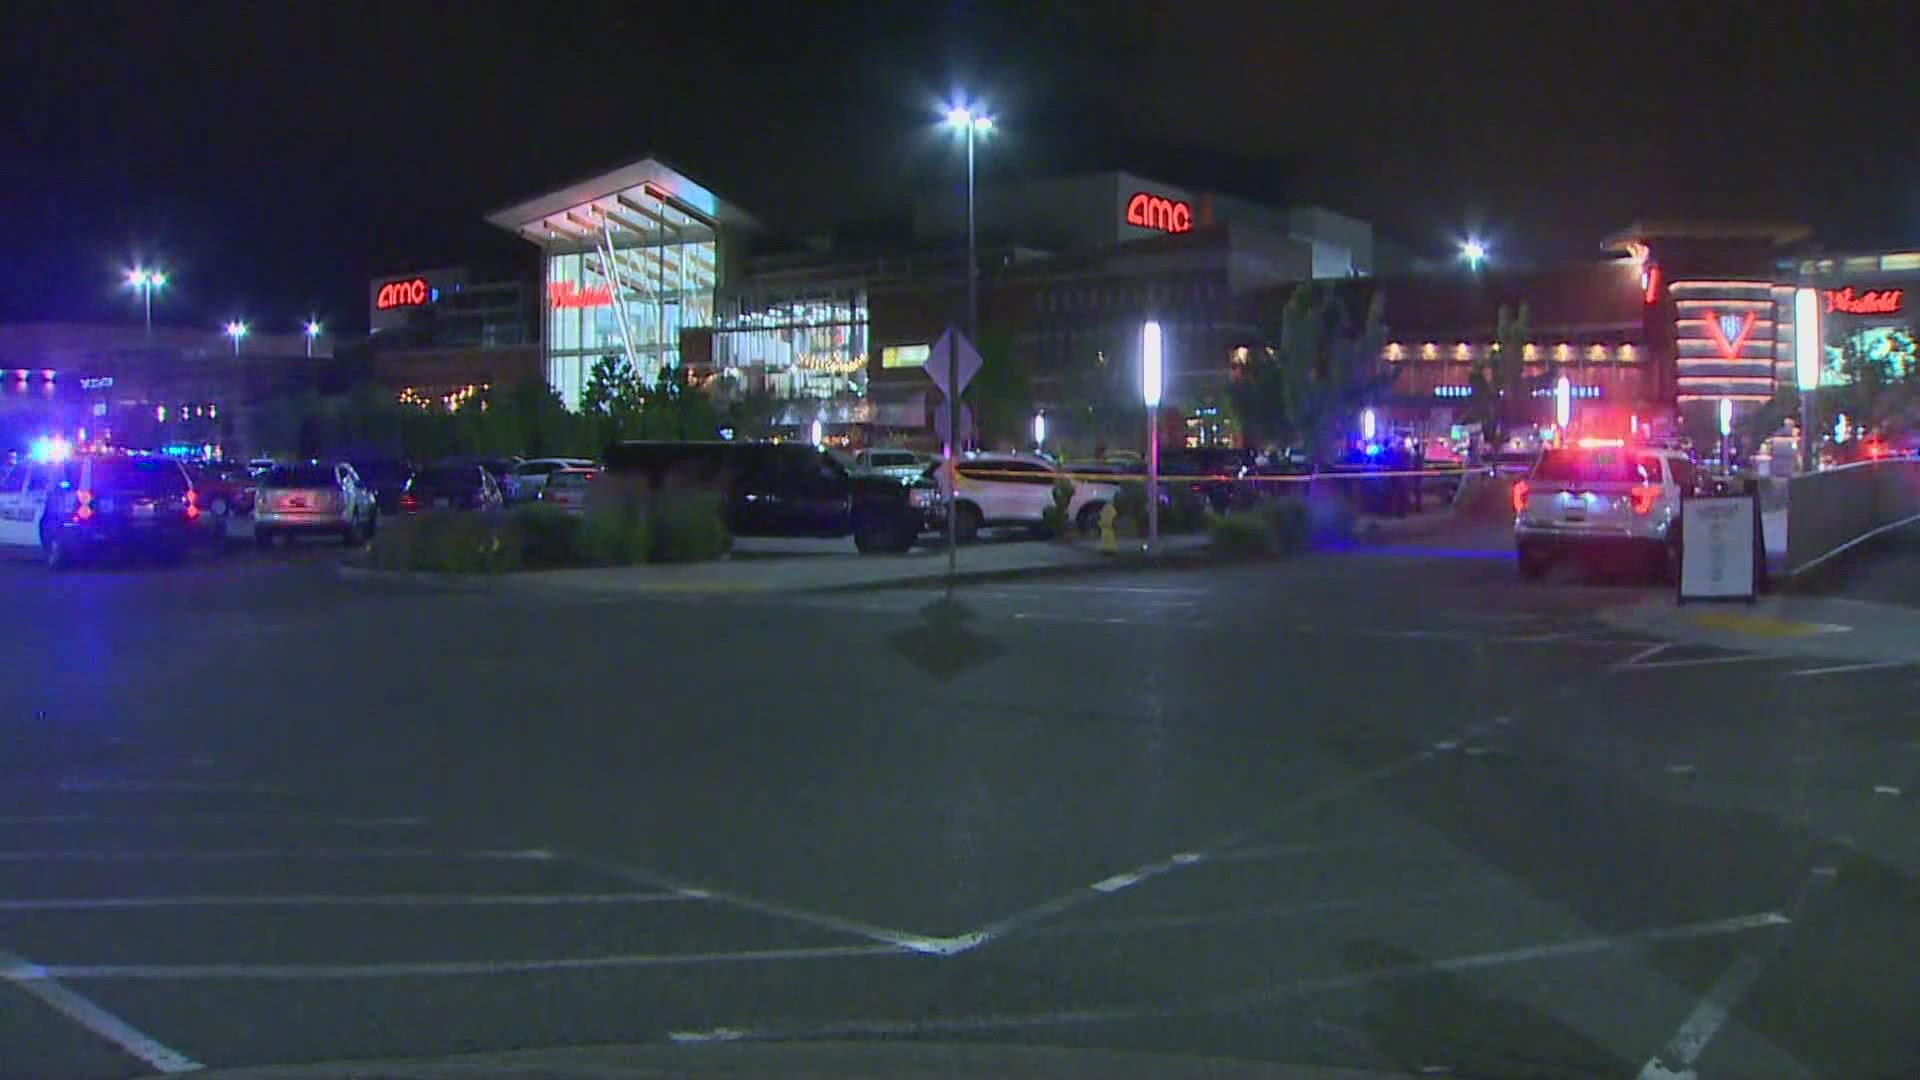 Police said a man was shot in the parking lot and sent to the hospital with serious injuries Friday night.